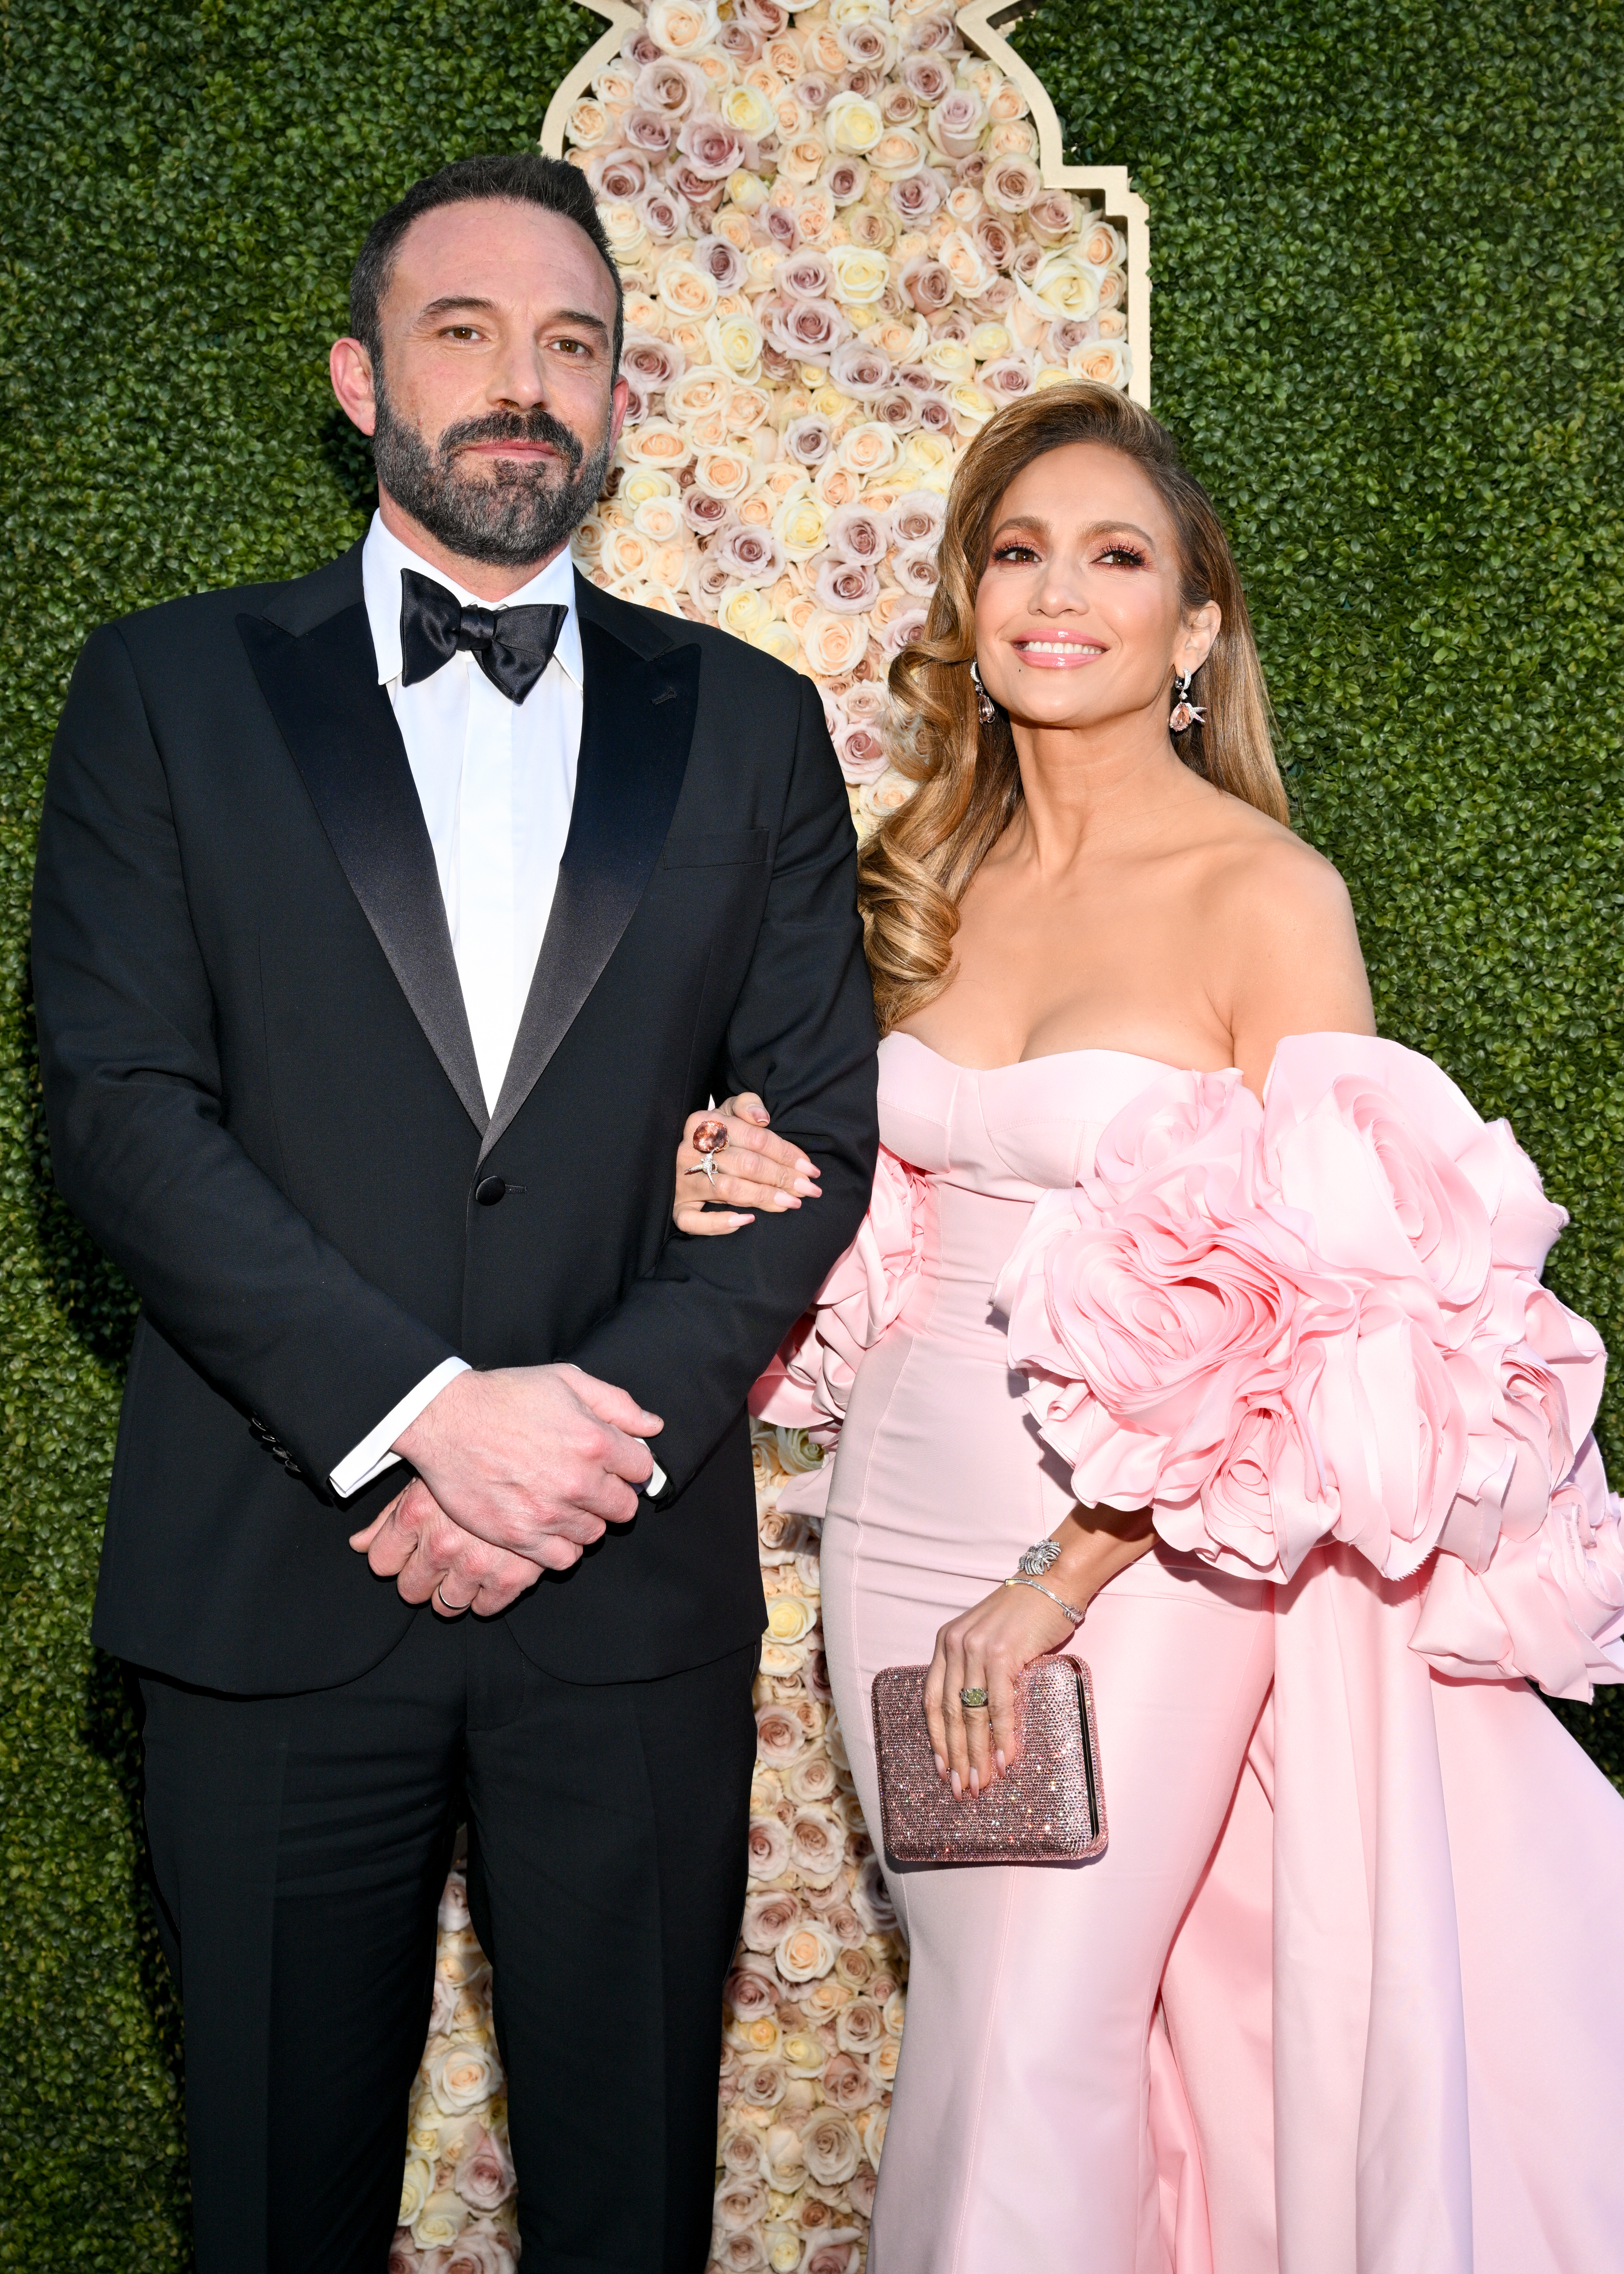 Ben Affleck Calls Jennifer Lopez His 'Wife' Amid Marriage Woes